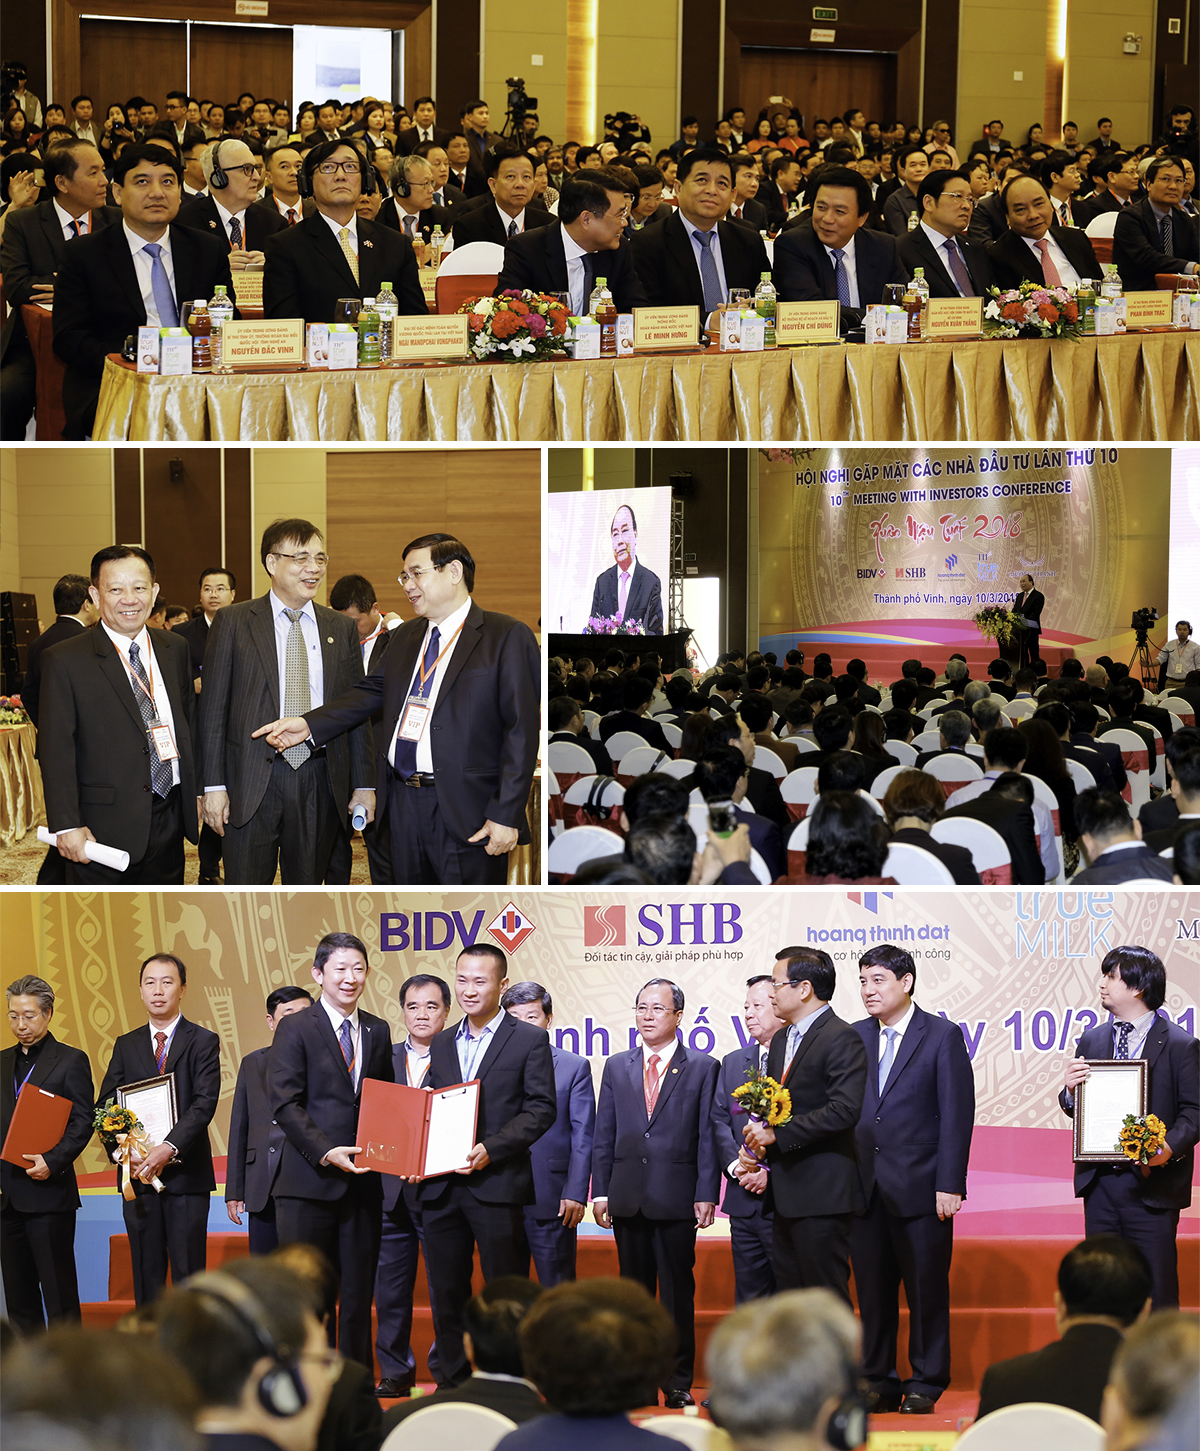 Several images of the Meeting with investors at lunar New Year 2018.